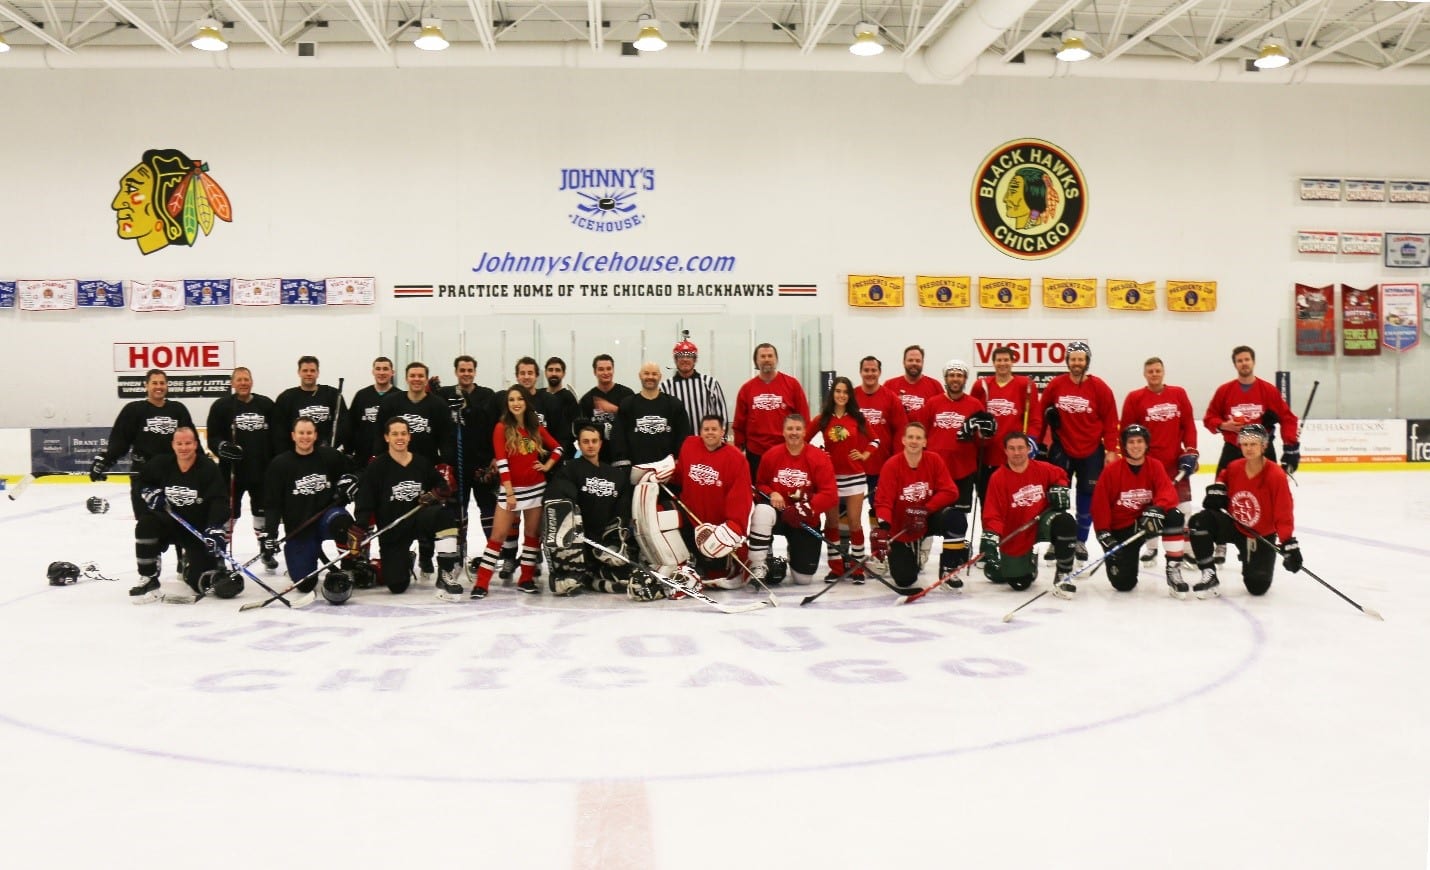 8th Annual CRE Broker Hockey Classic set for March 1st